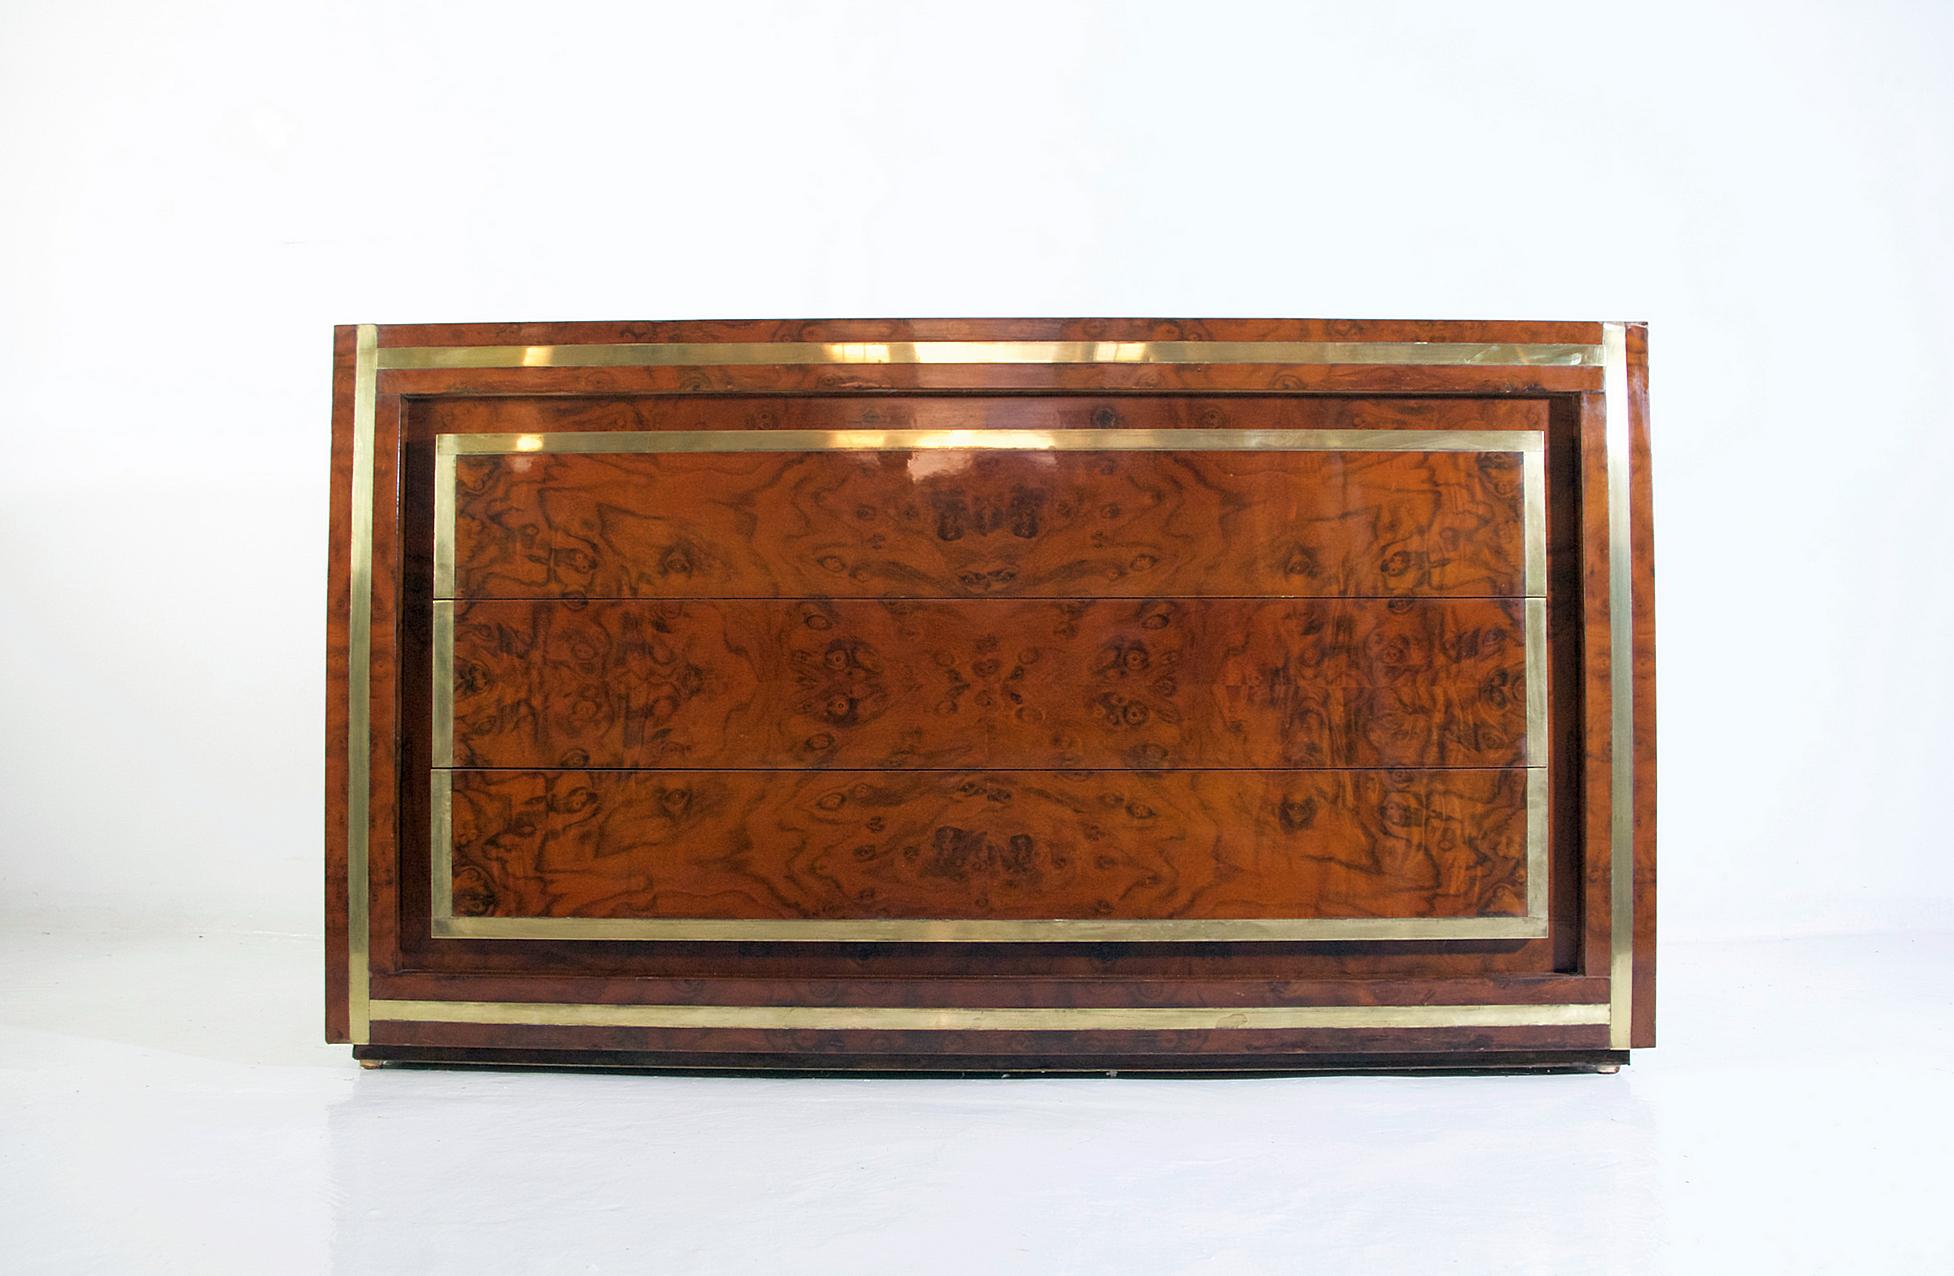 An elegant dresser in maple burl with brass details by Willy Rizzo. It has four spacious drawers and smart brass fittings. In very nice condition and of high quality production.